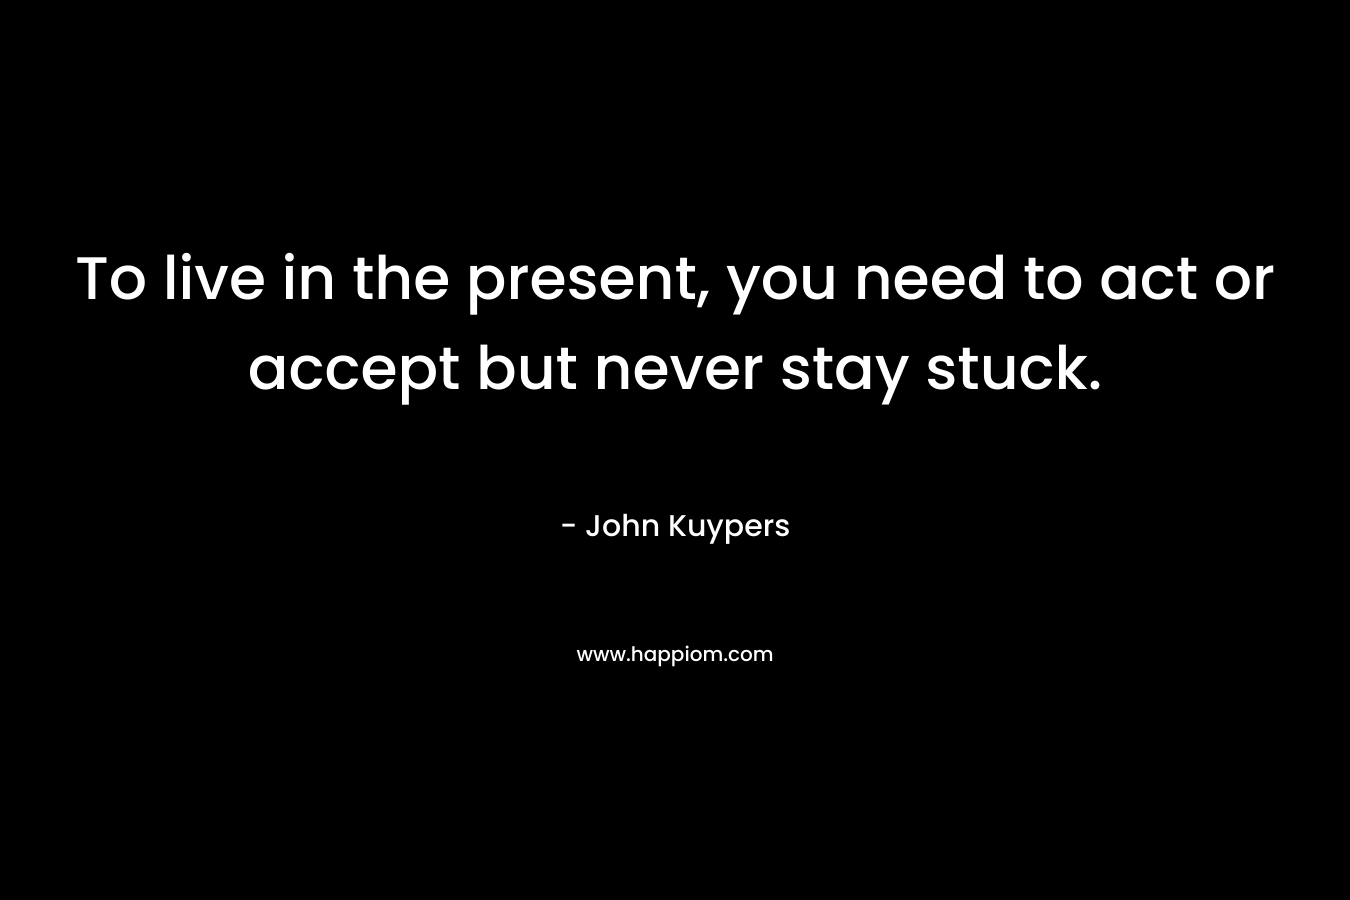 To live in the present, you need to act or accept but never stay stuck. – John Kuypers